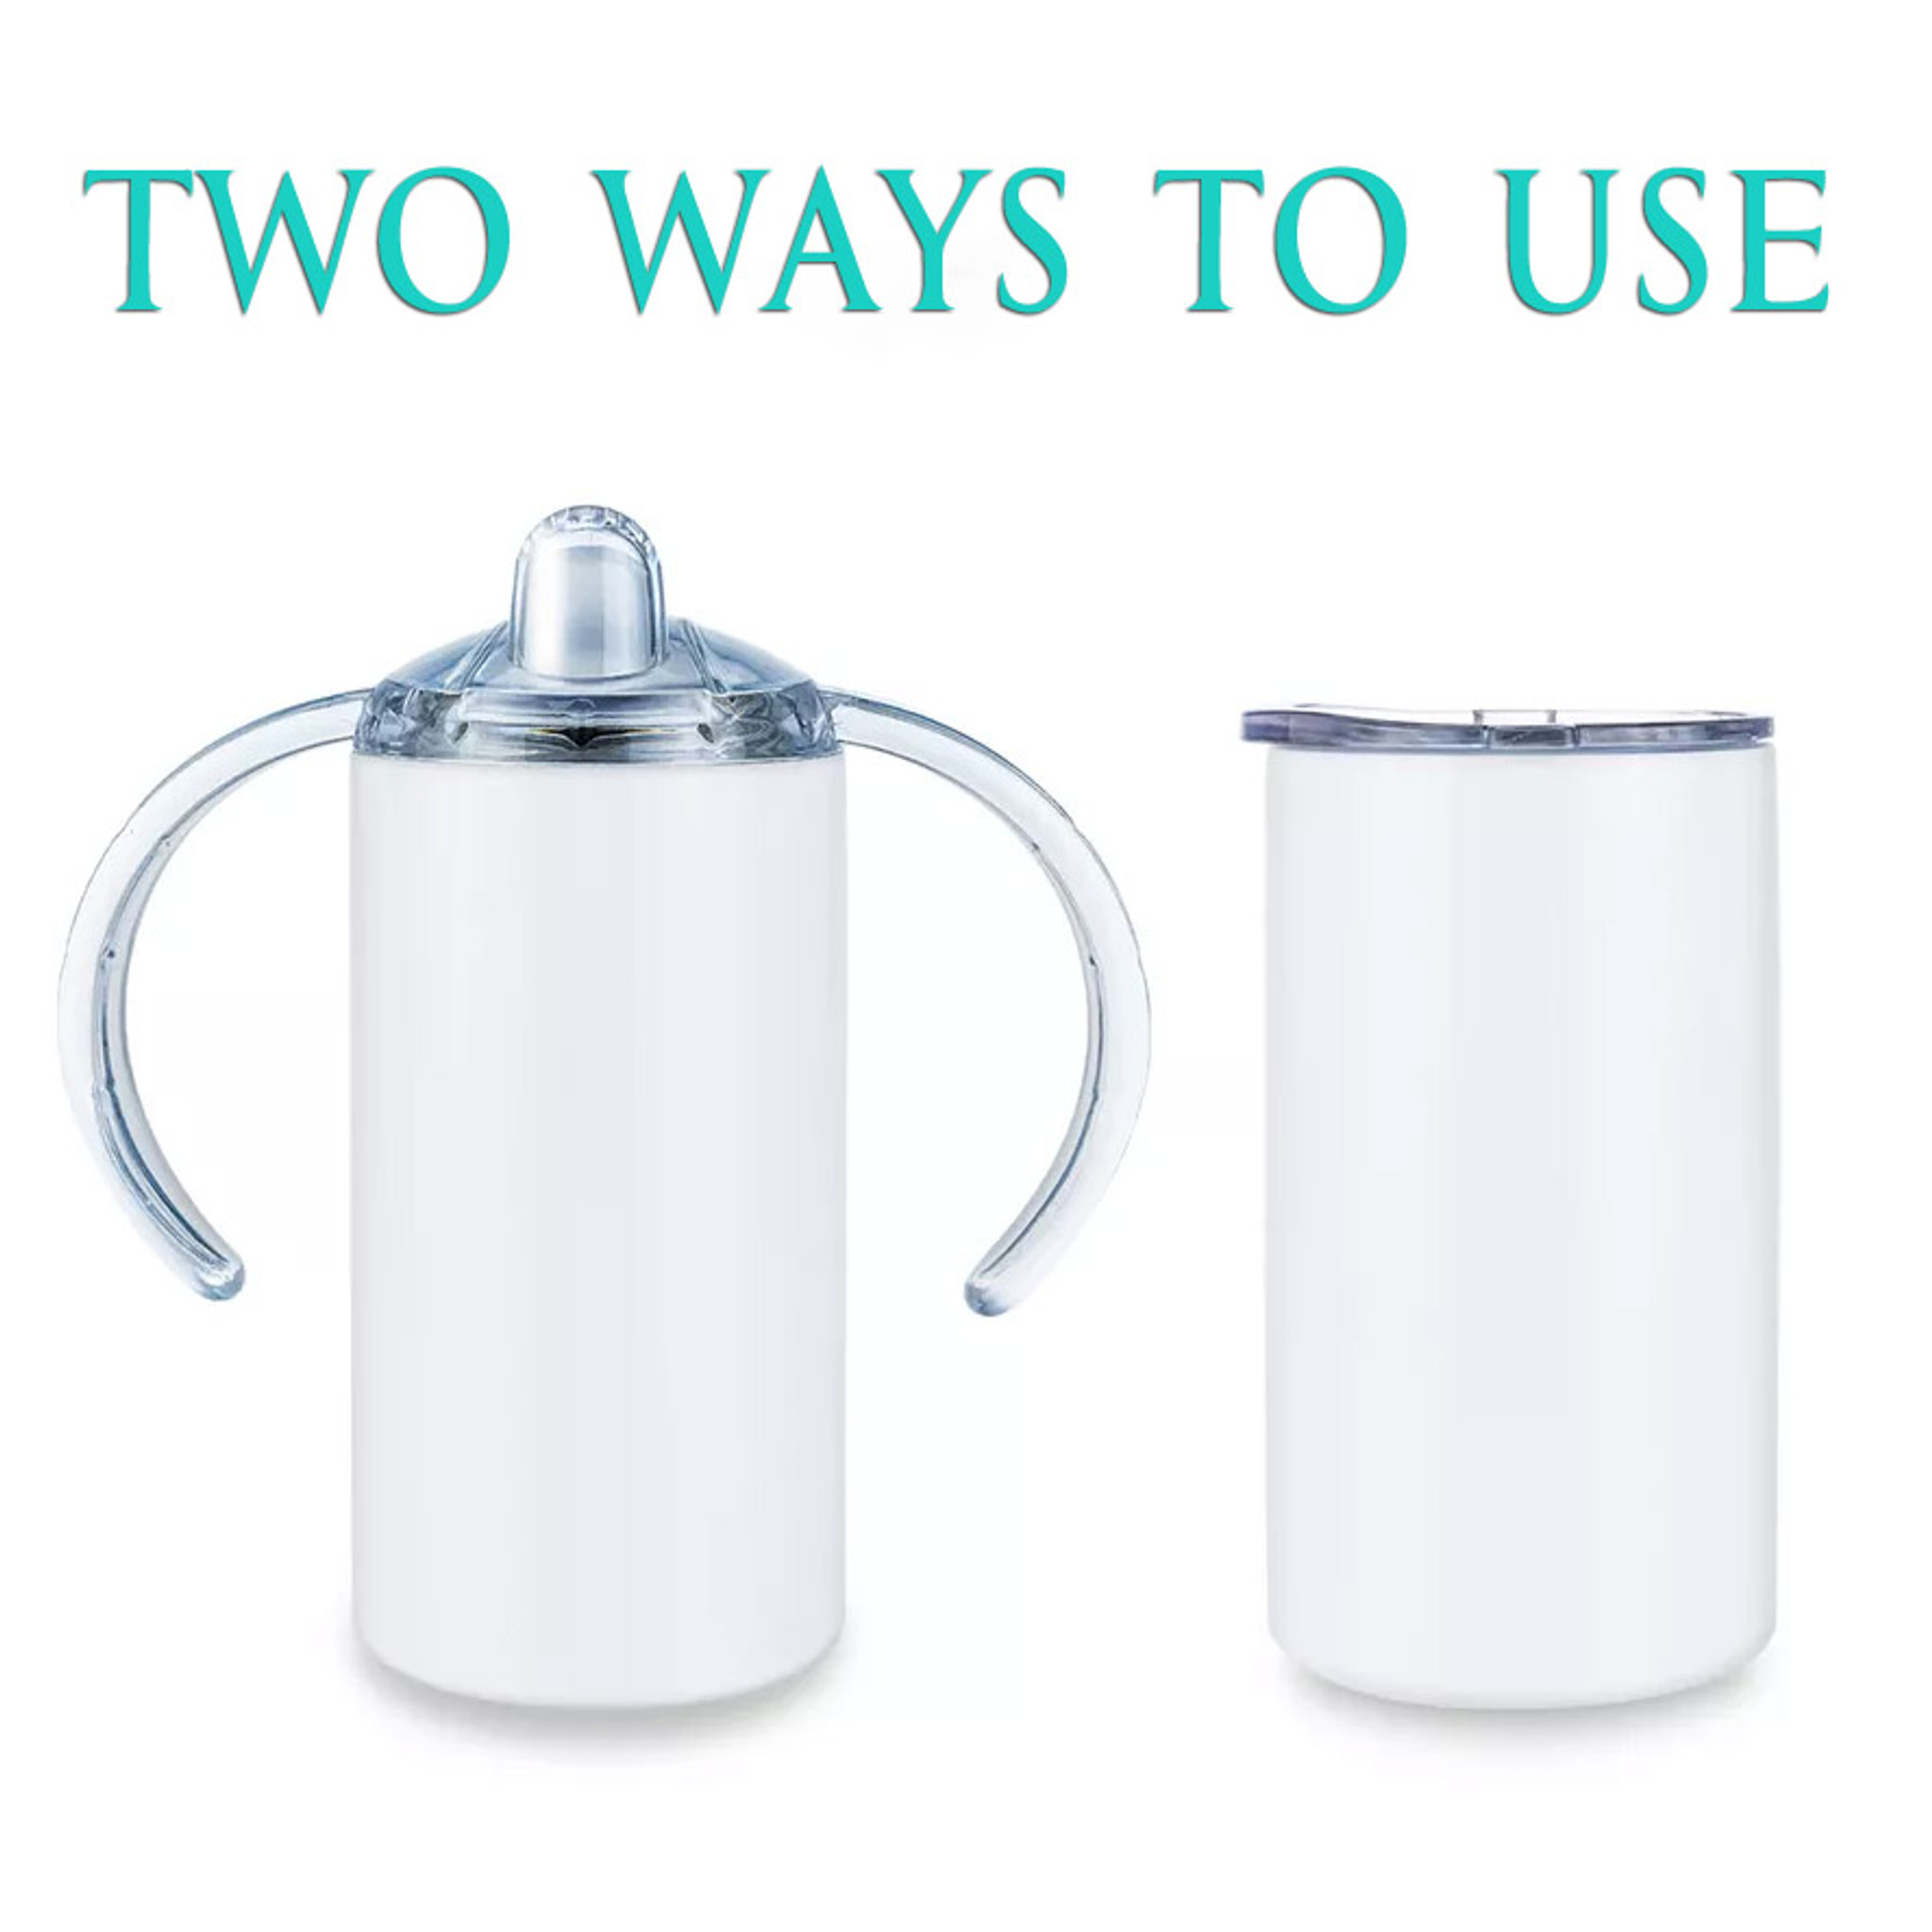 Craft Express  2-Pack 13oz Stainless Steel Sippy Cup